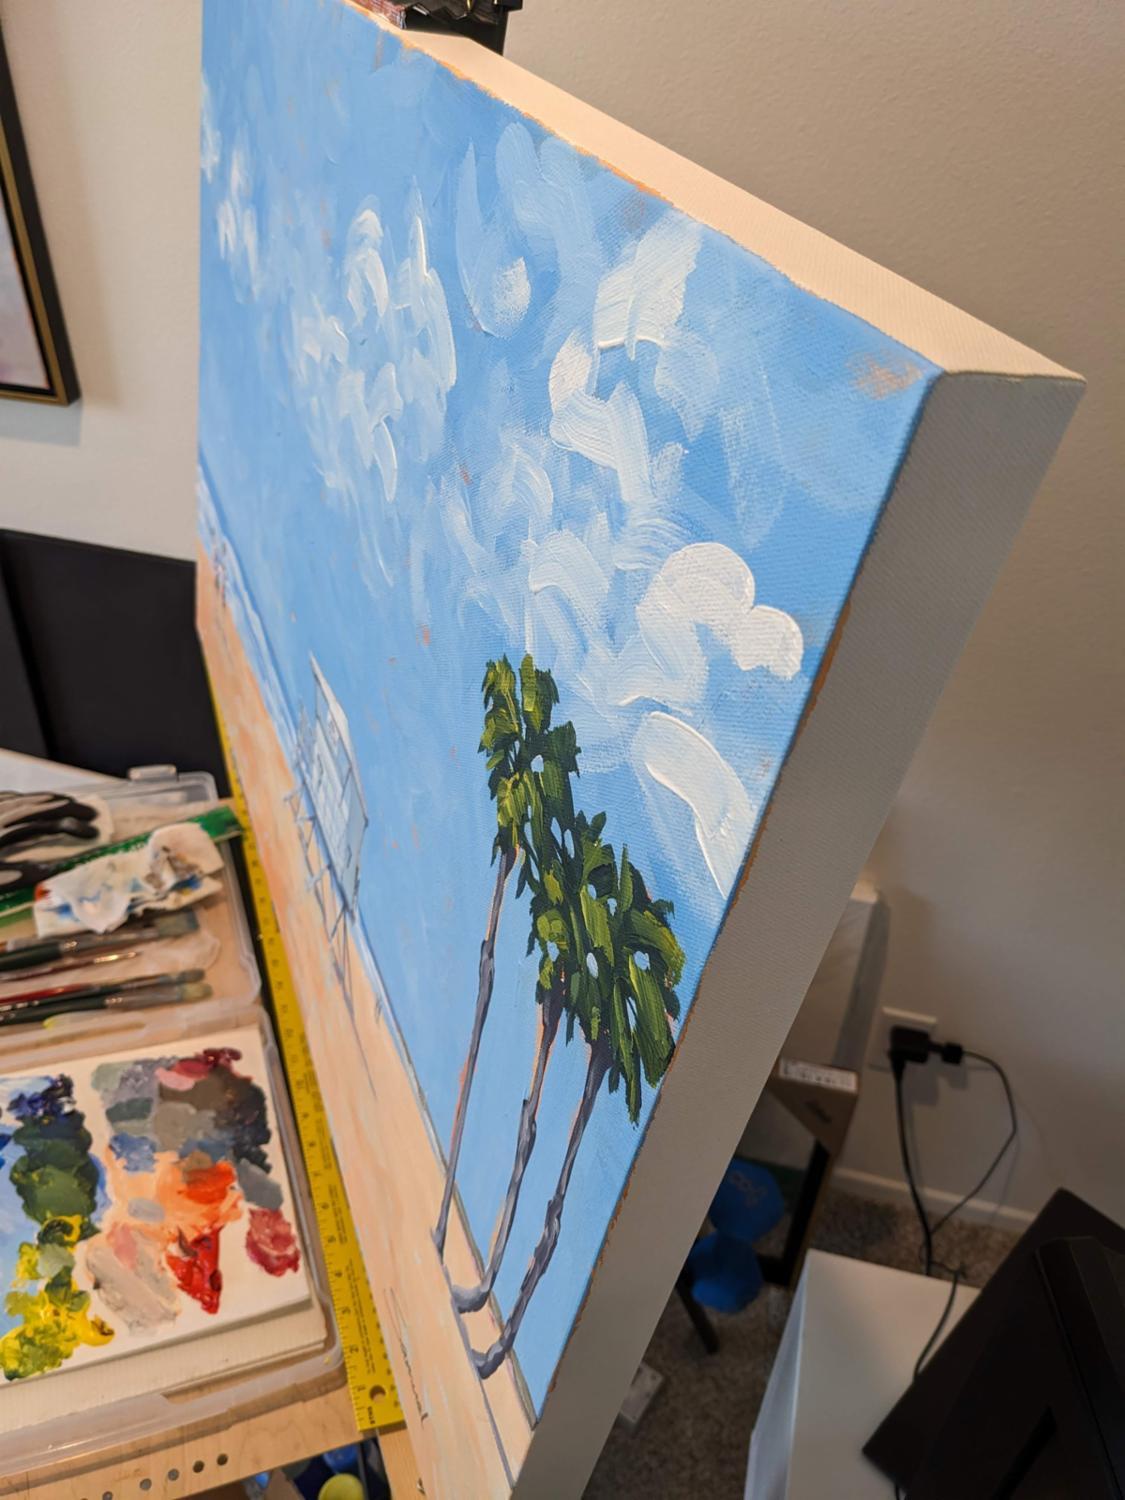 <p>Artist Comments<br>The lifeguard tower, palm trees, and beachgoers bask in the sun on a radiant summer day. The wind blows the clouds across the sky and sweeps the waves along the shore. Bright, vibrant colors and soft brushstrokes bring the